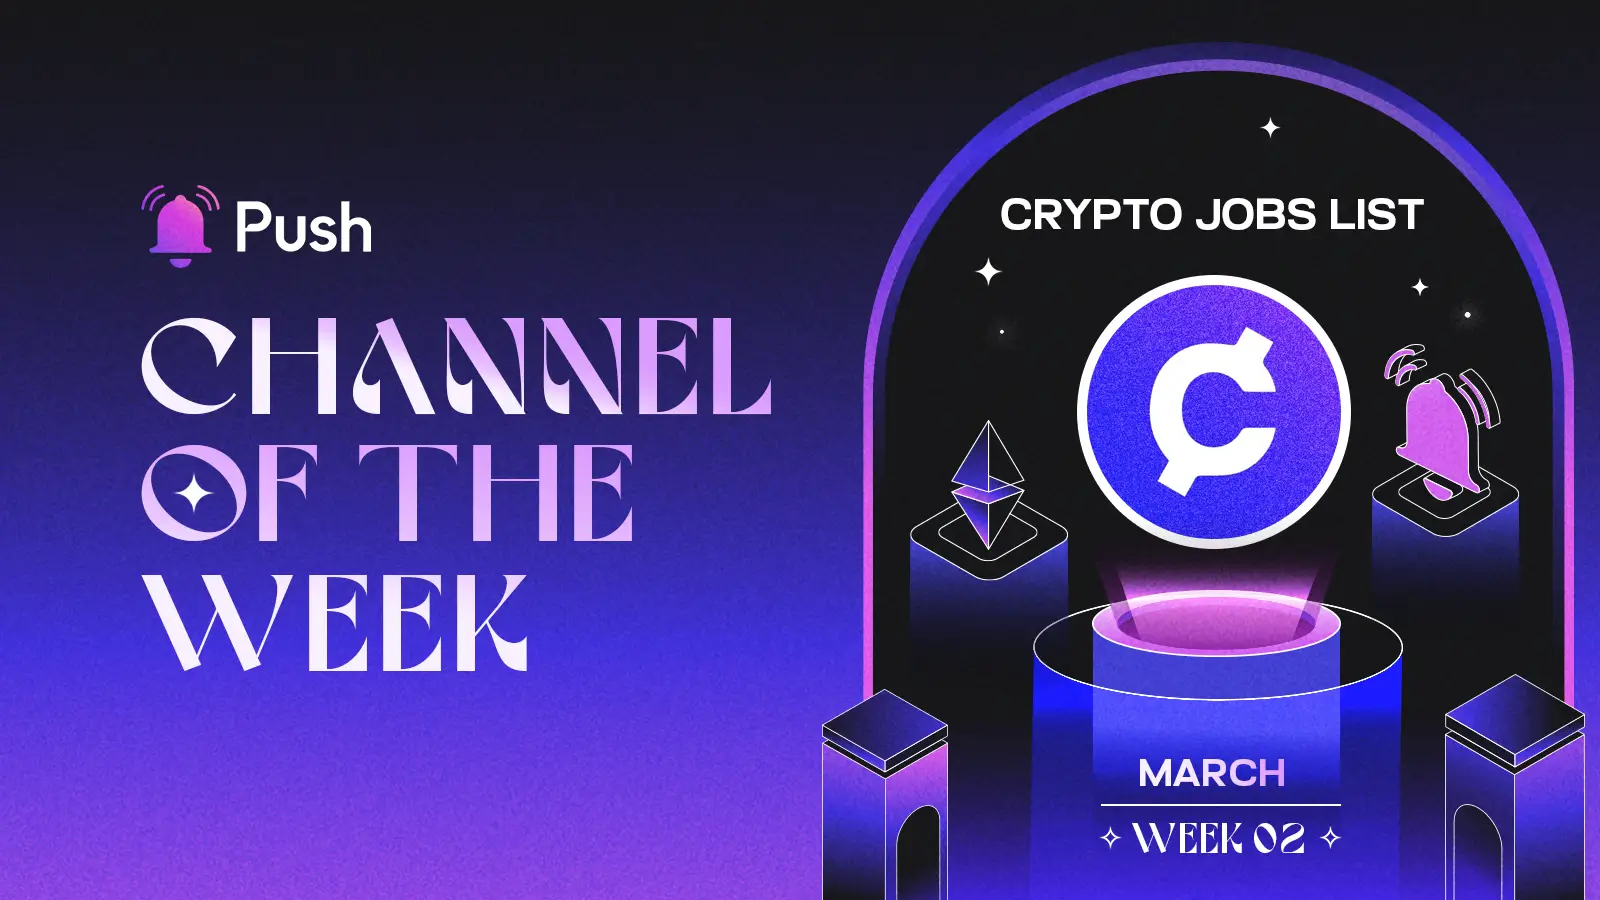 Banner celebrating Crypto Jobs List as March - week 2 channel of week